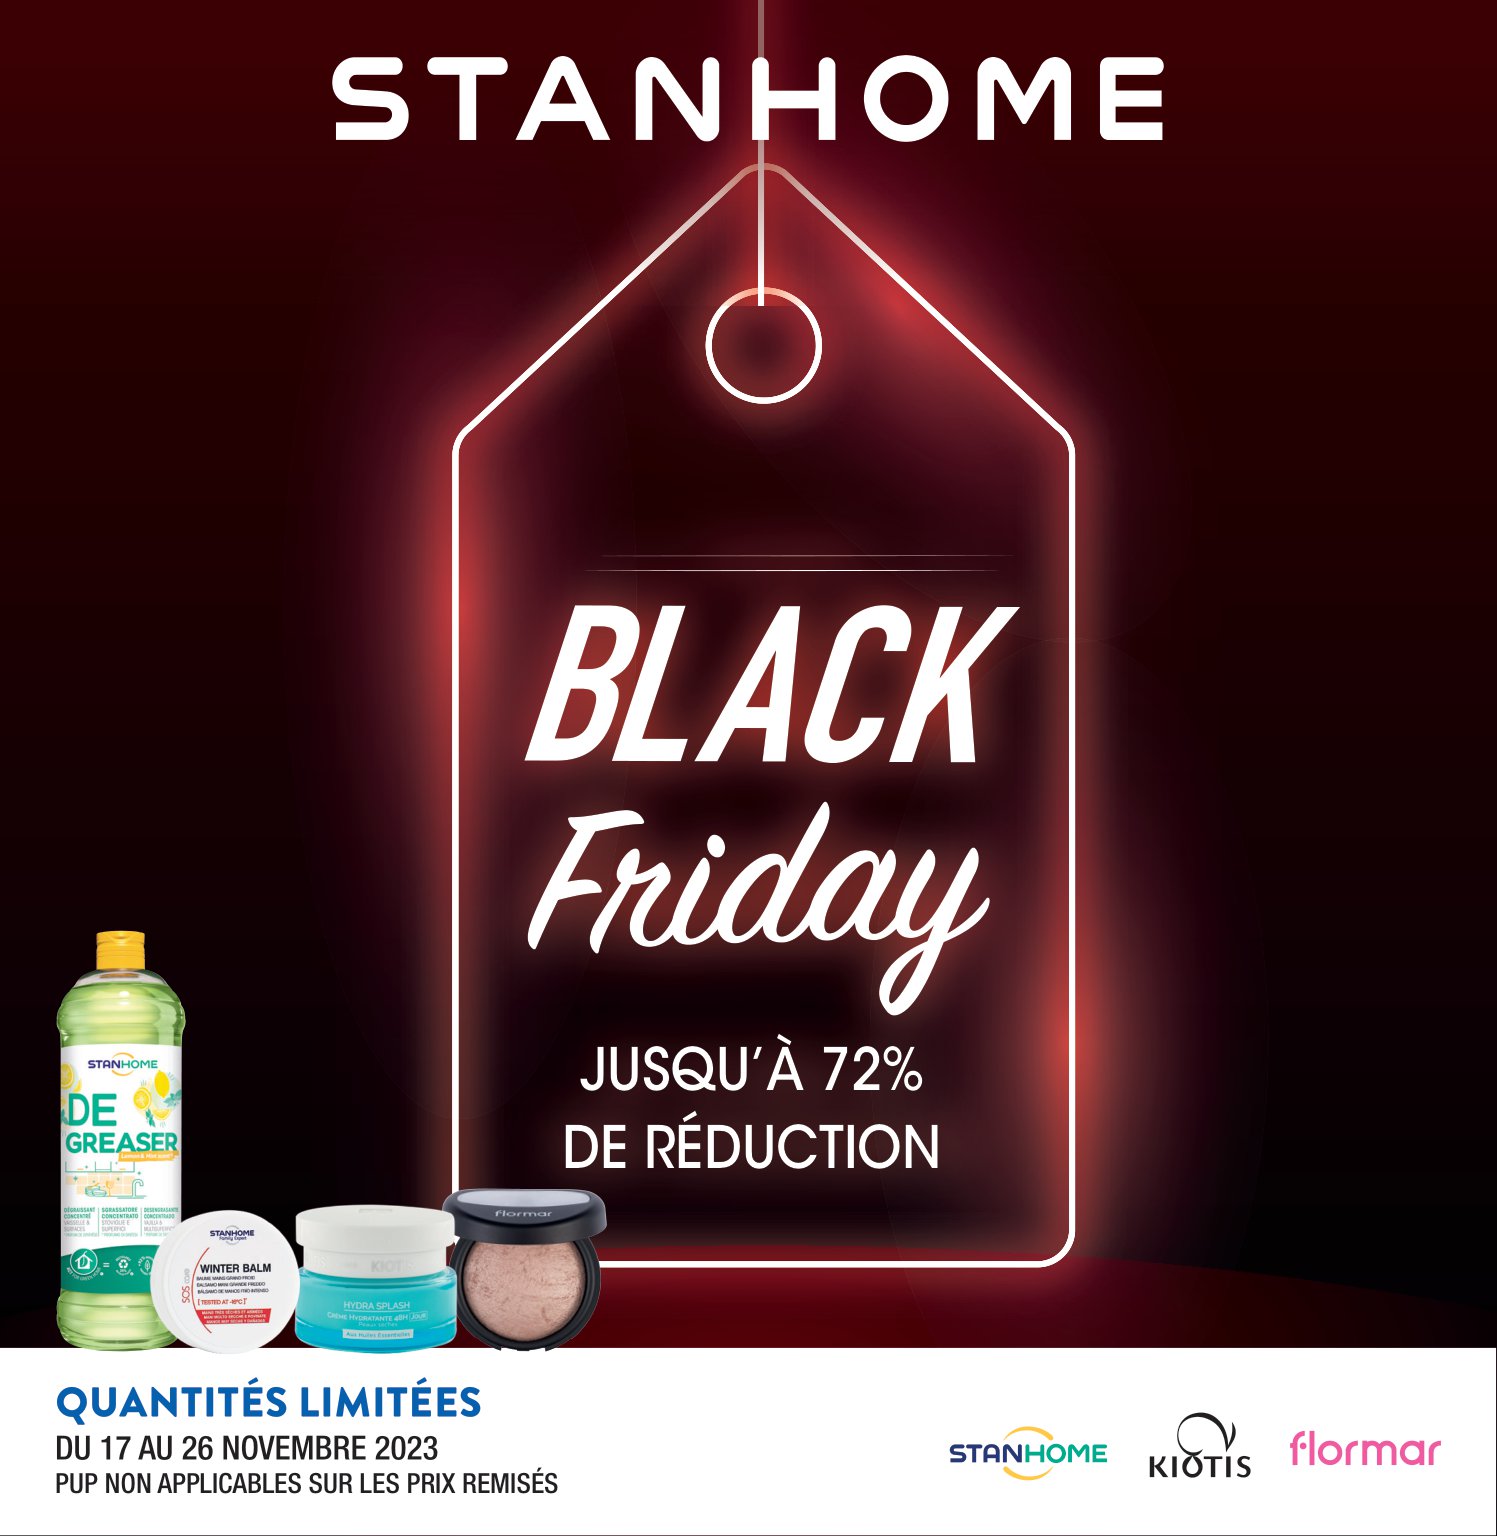 Catalogue Stanhome Black Friday 2023 1 – stannhome bf 01